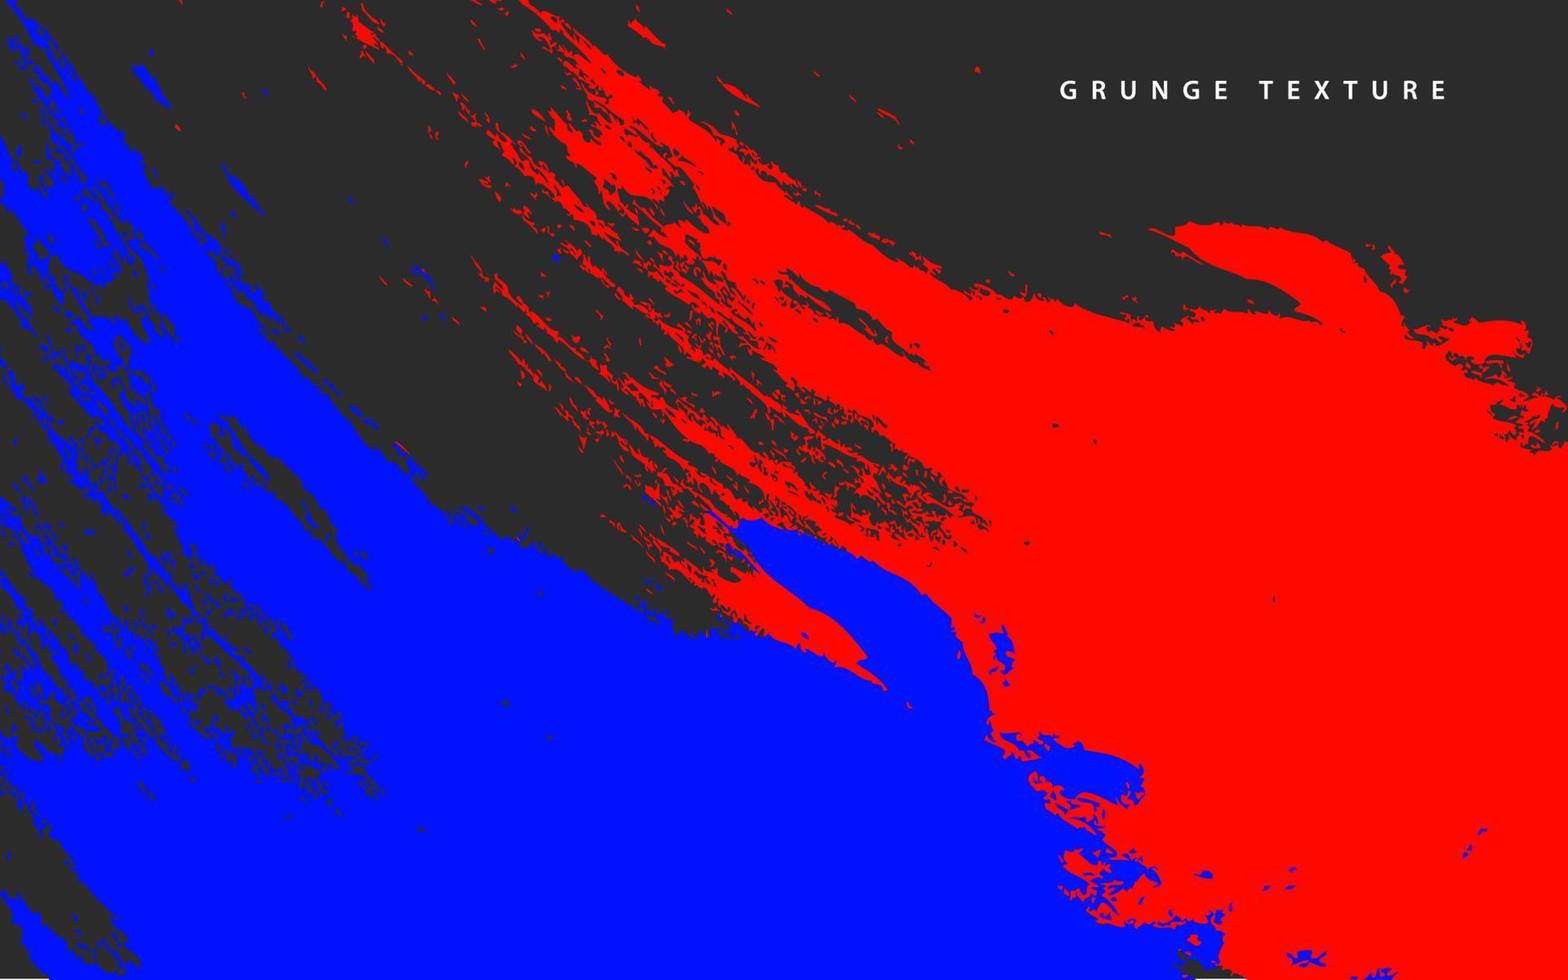 Abstract grunge texture paintbrush blue and red background vector